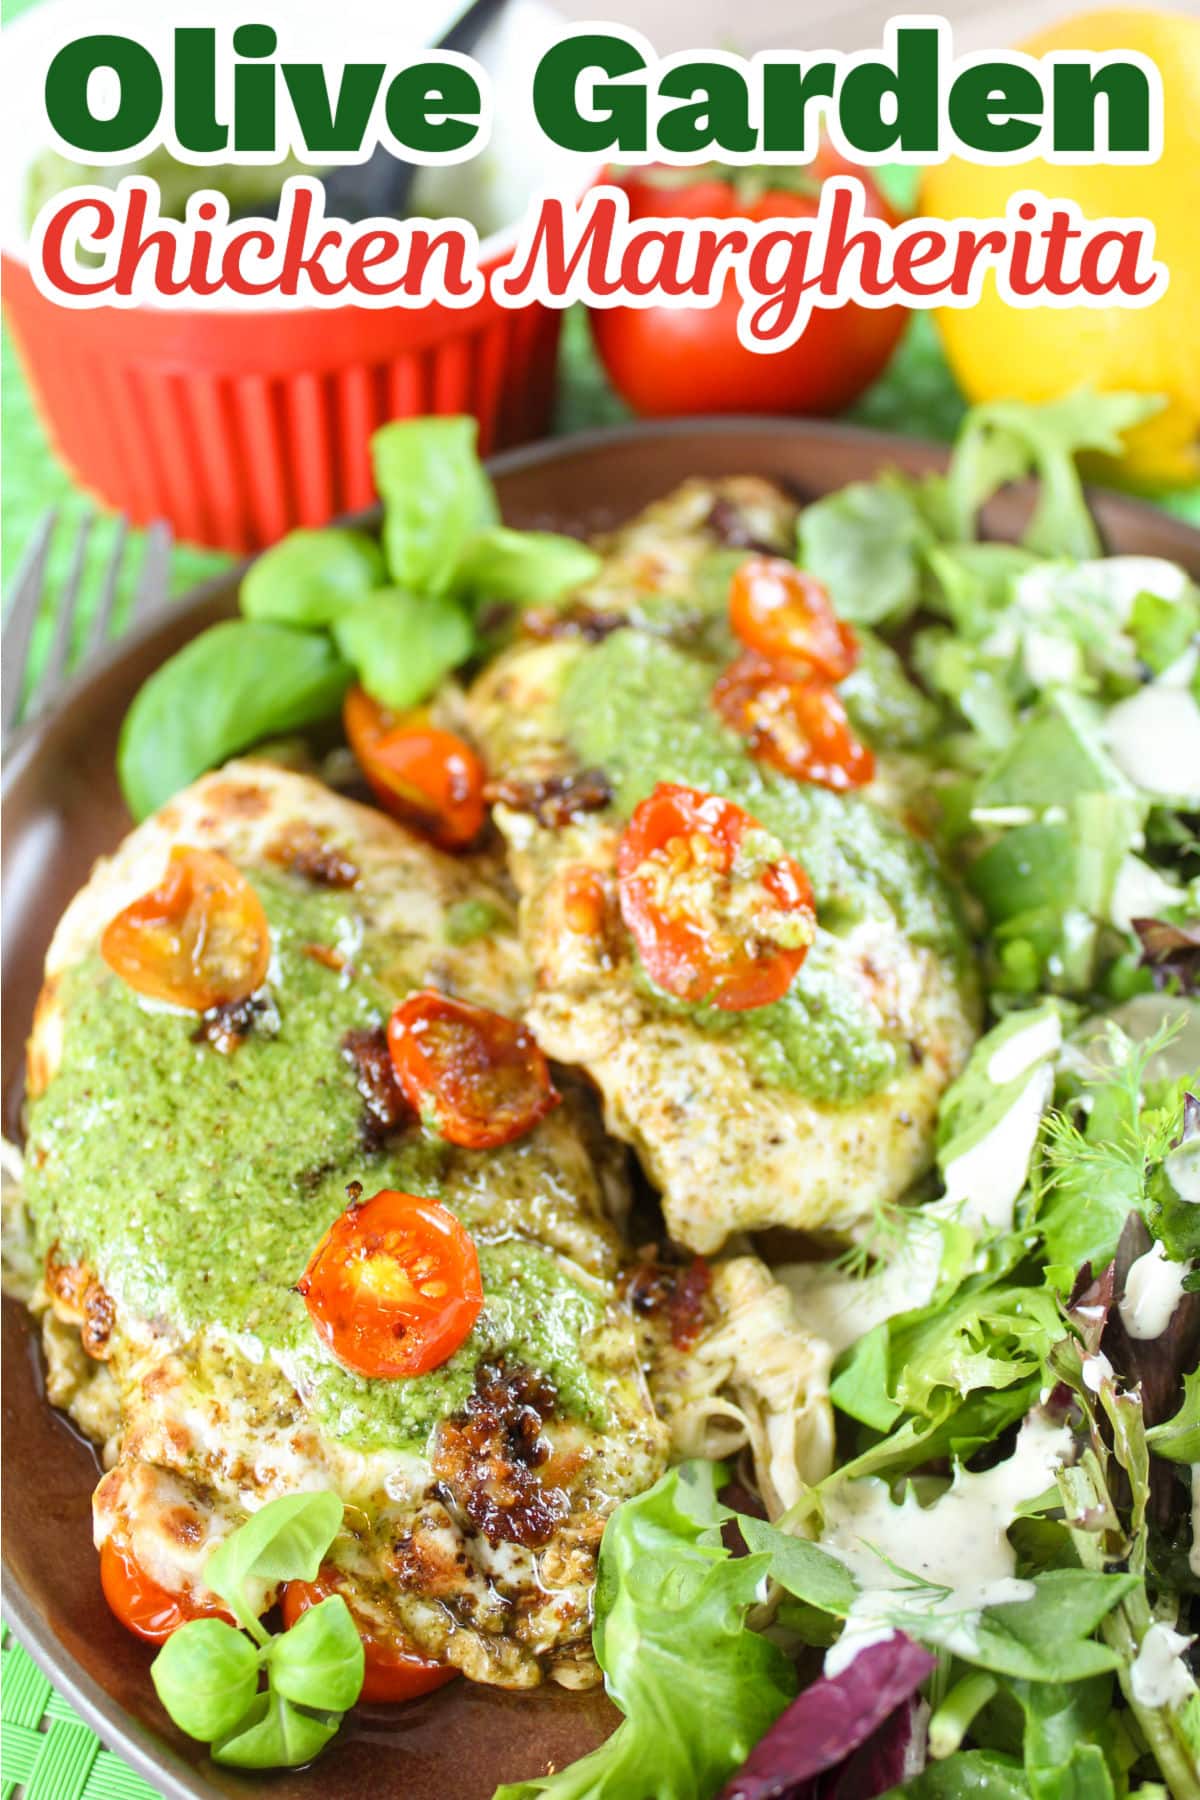 Olive Garden Chicken Margherita features juicy chicken breasts topped with fresh tomatoes, fresh mozzarella, basil pesto and a lemon garlic sauce. This is one of my favorite recipes and it's super simple to make!  via @foodhussy